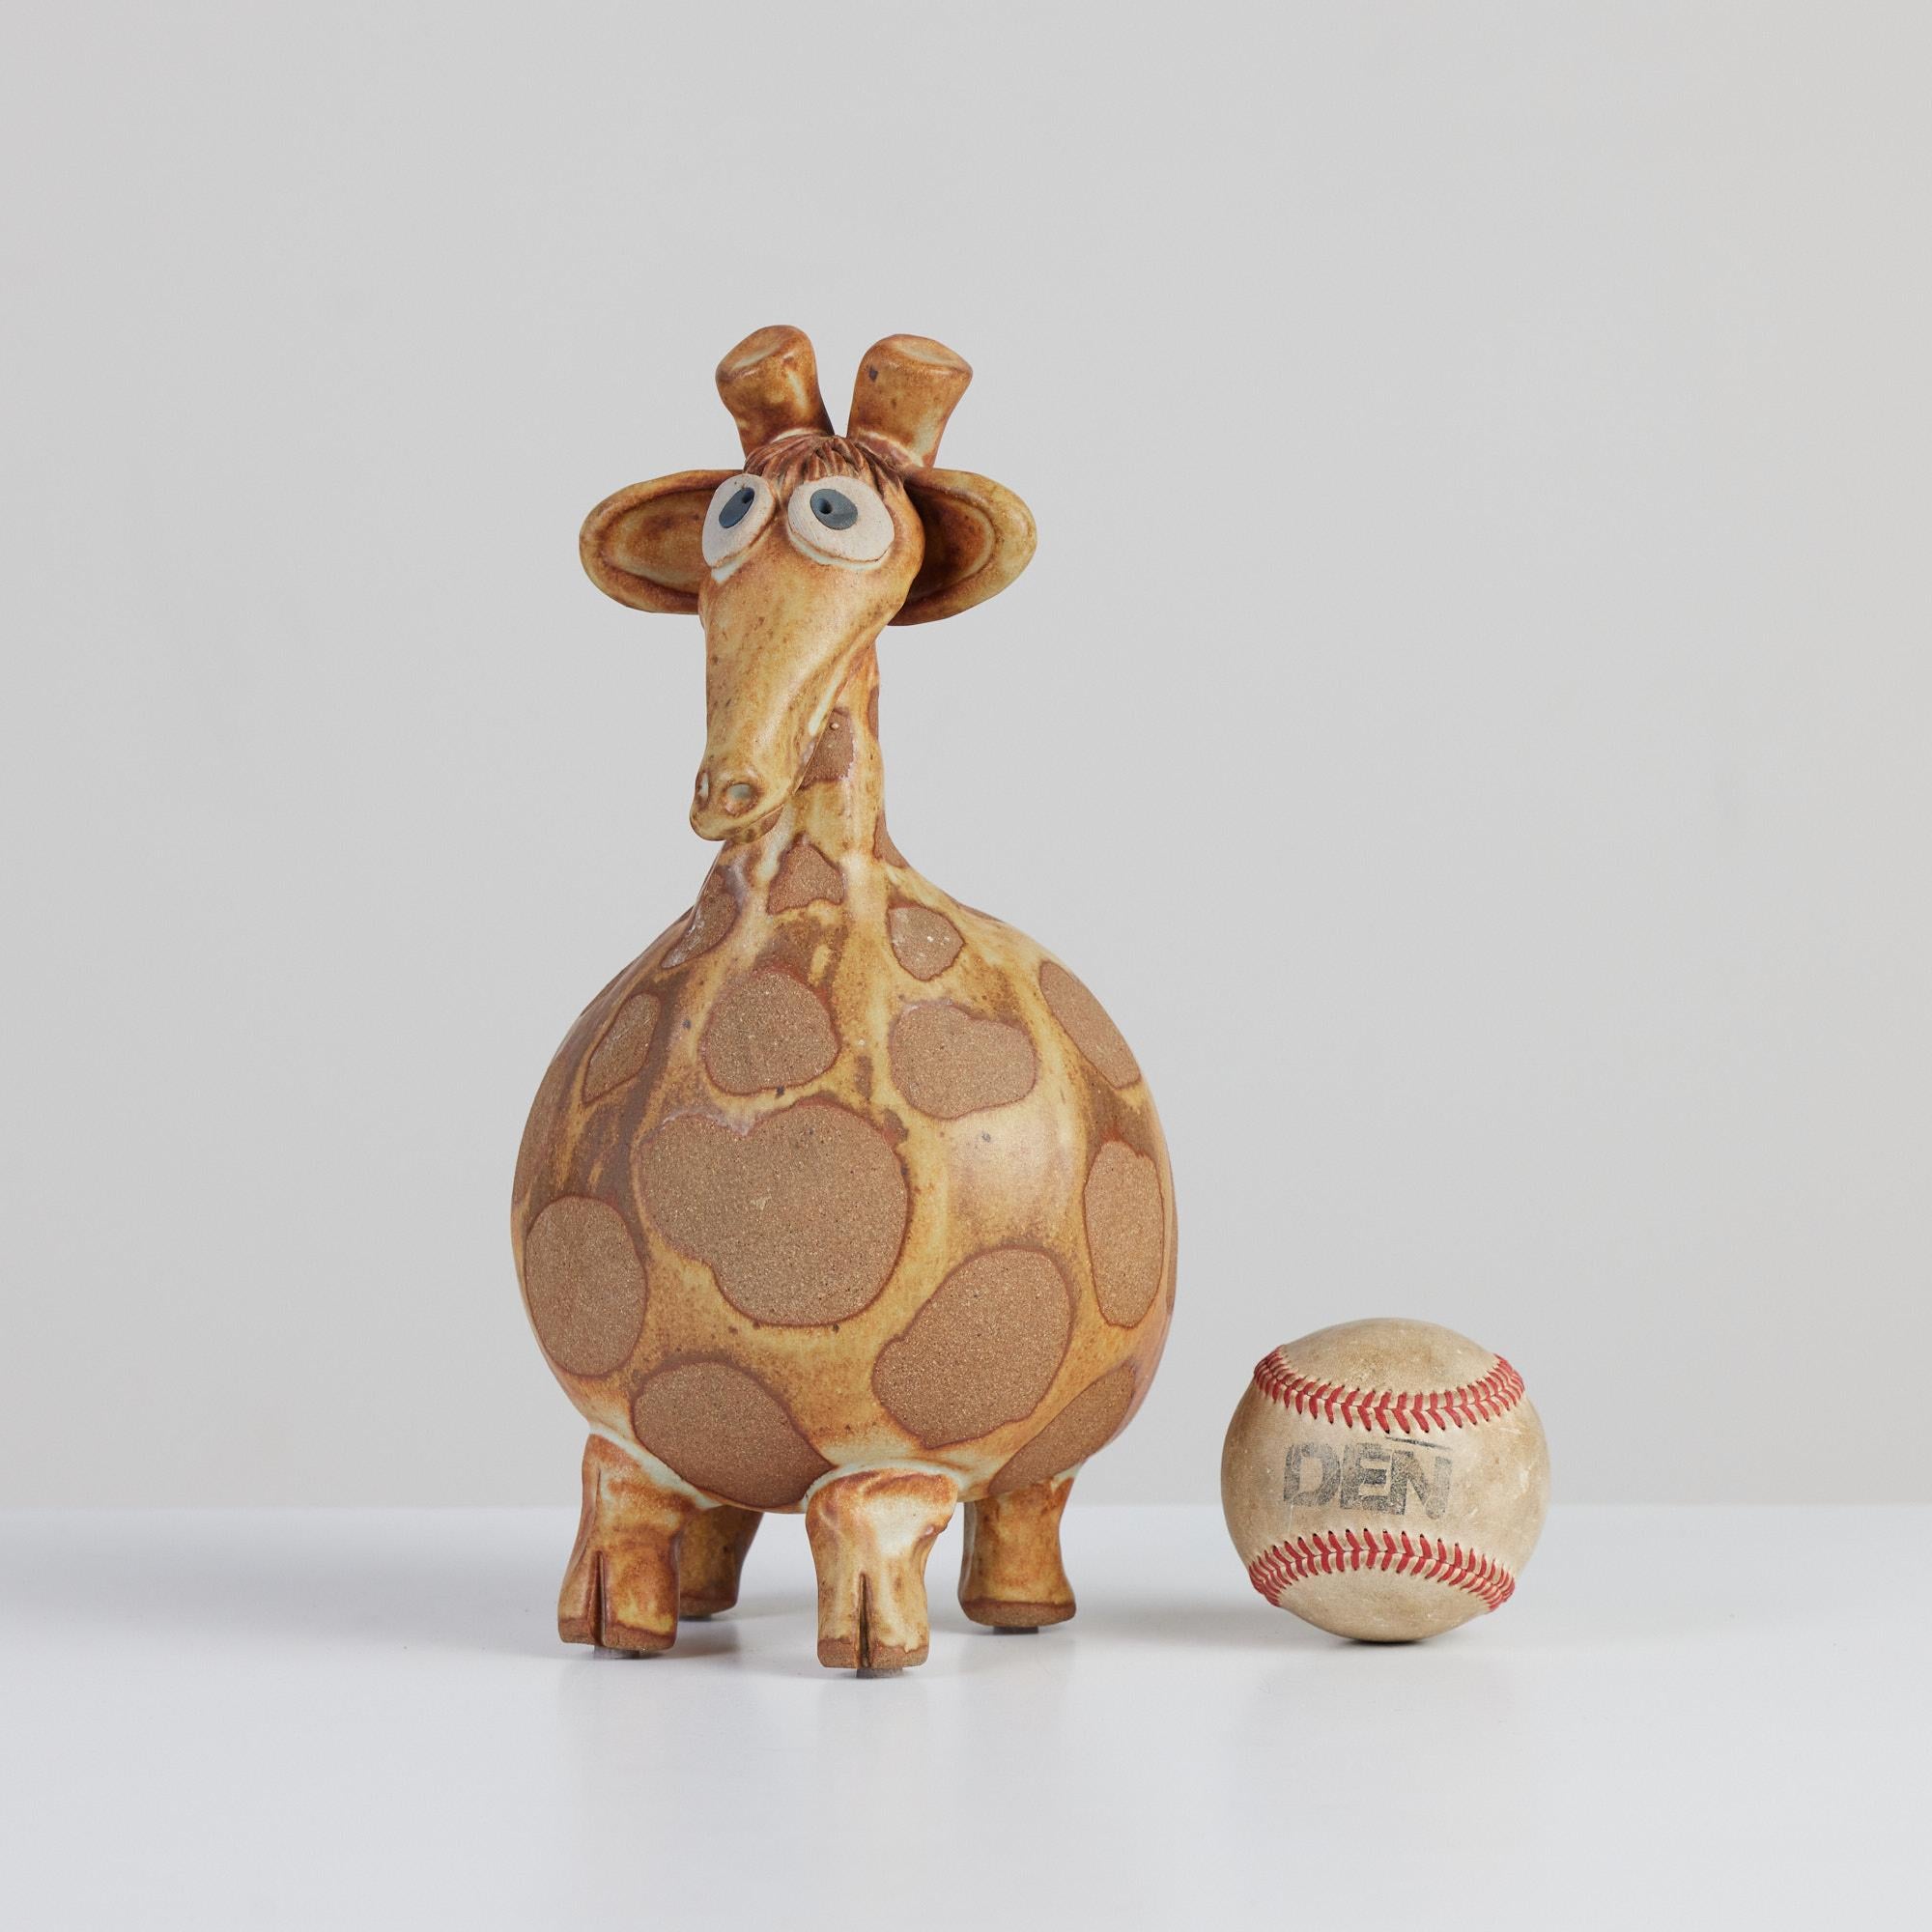 Hand built studio ceramic of a giraffe. This piece is mixed with both natural colored stoneware and yellow orangish glazed elements. The playful sculpture can simply be shelf décor or used as its intended purpose, a piggy bank.

Signed by artist